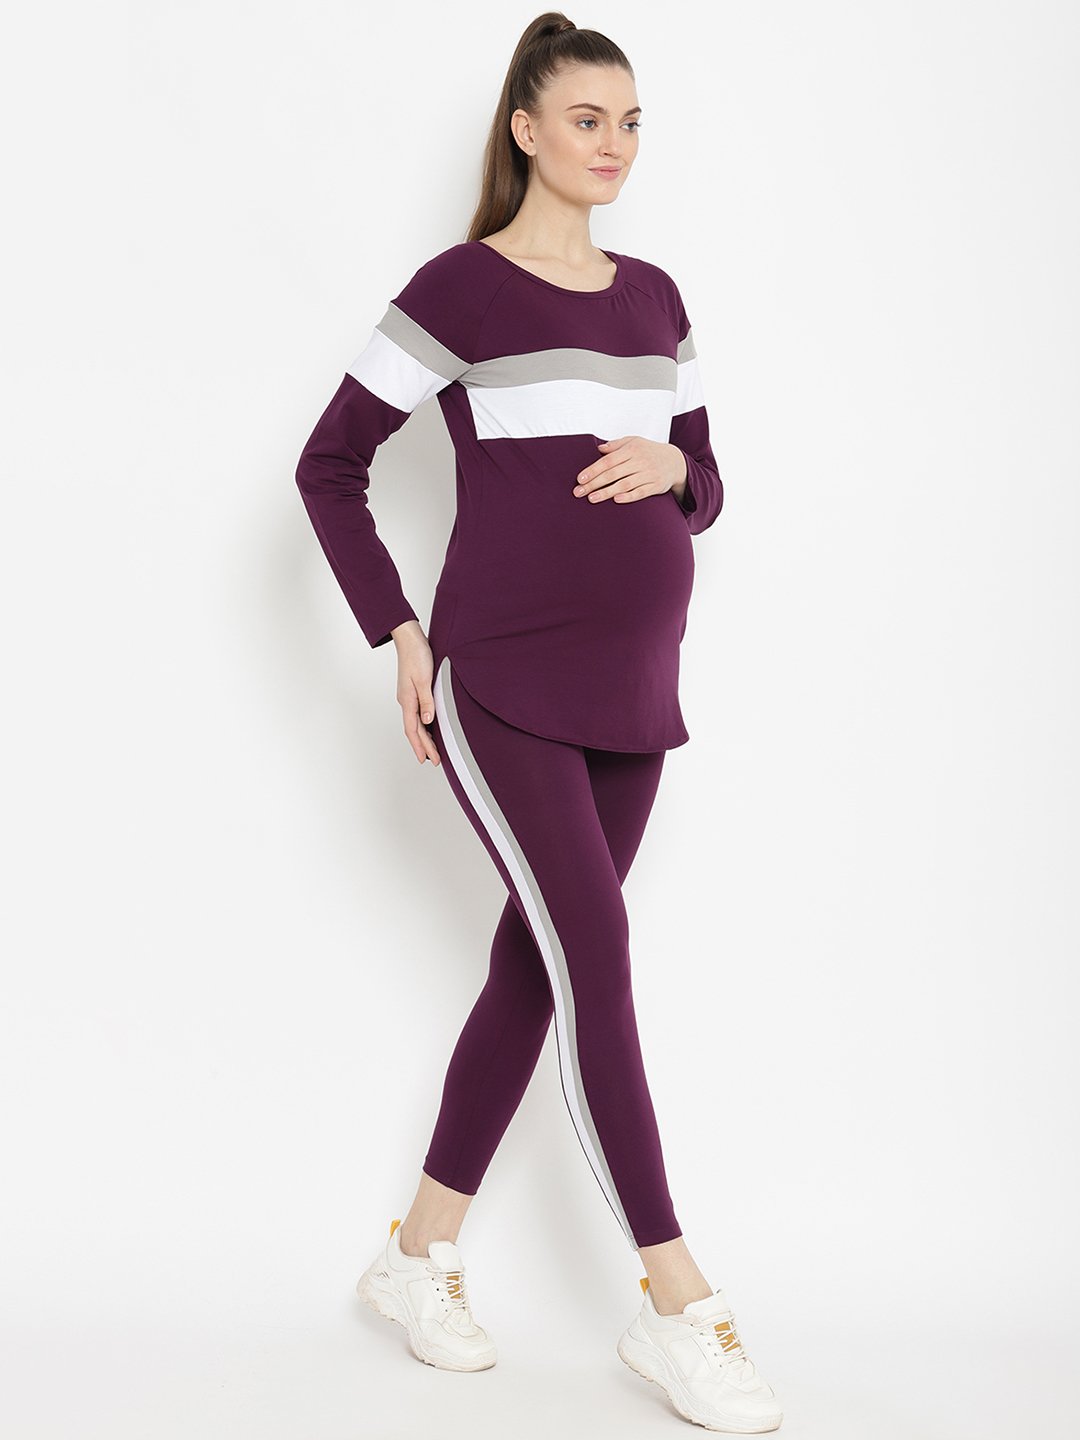 CANNES MATERNITY YOGA PANTS NAVY – Dear Collective